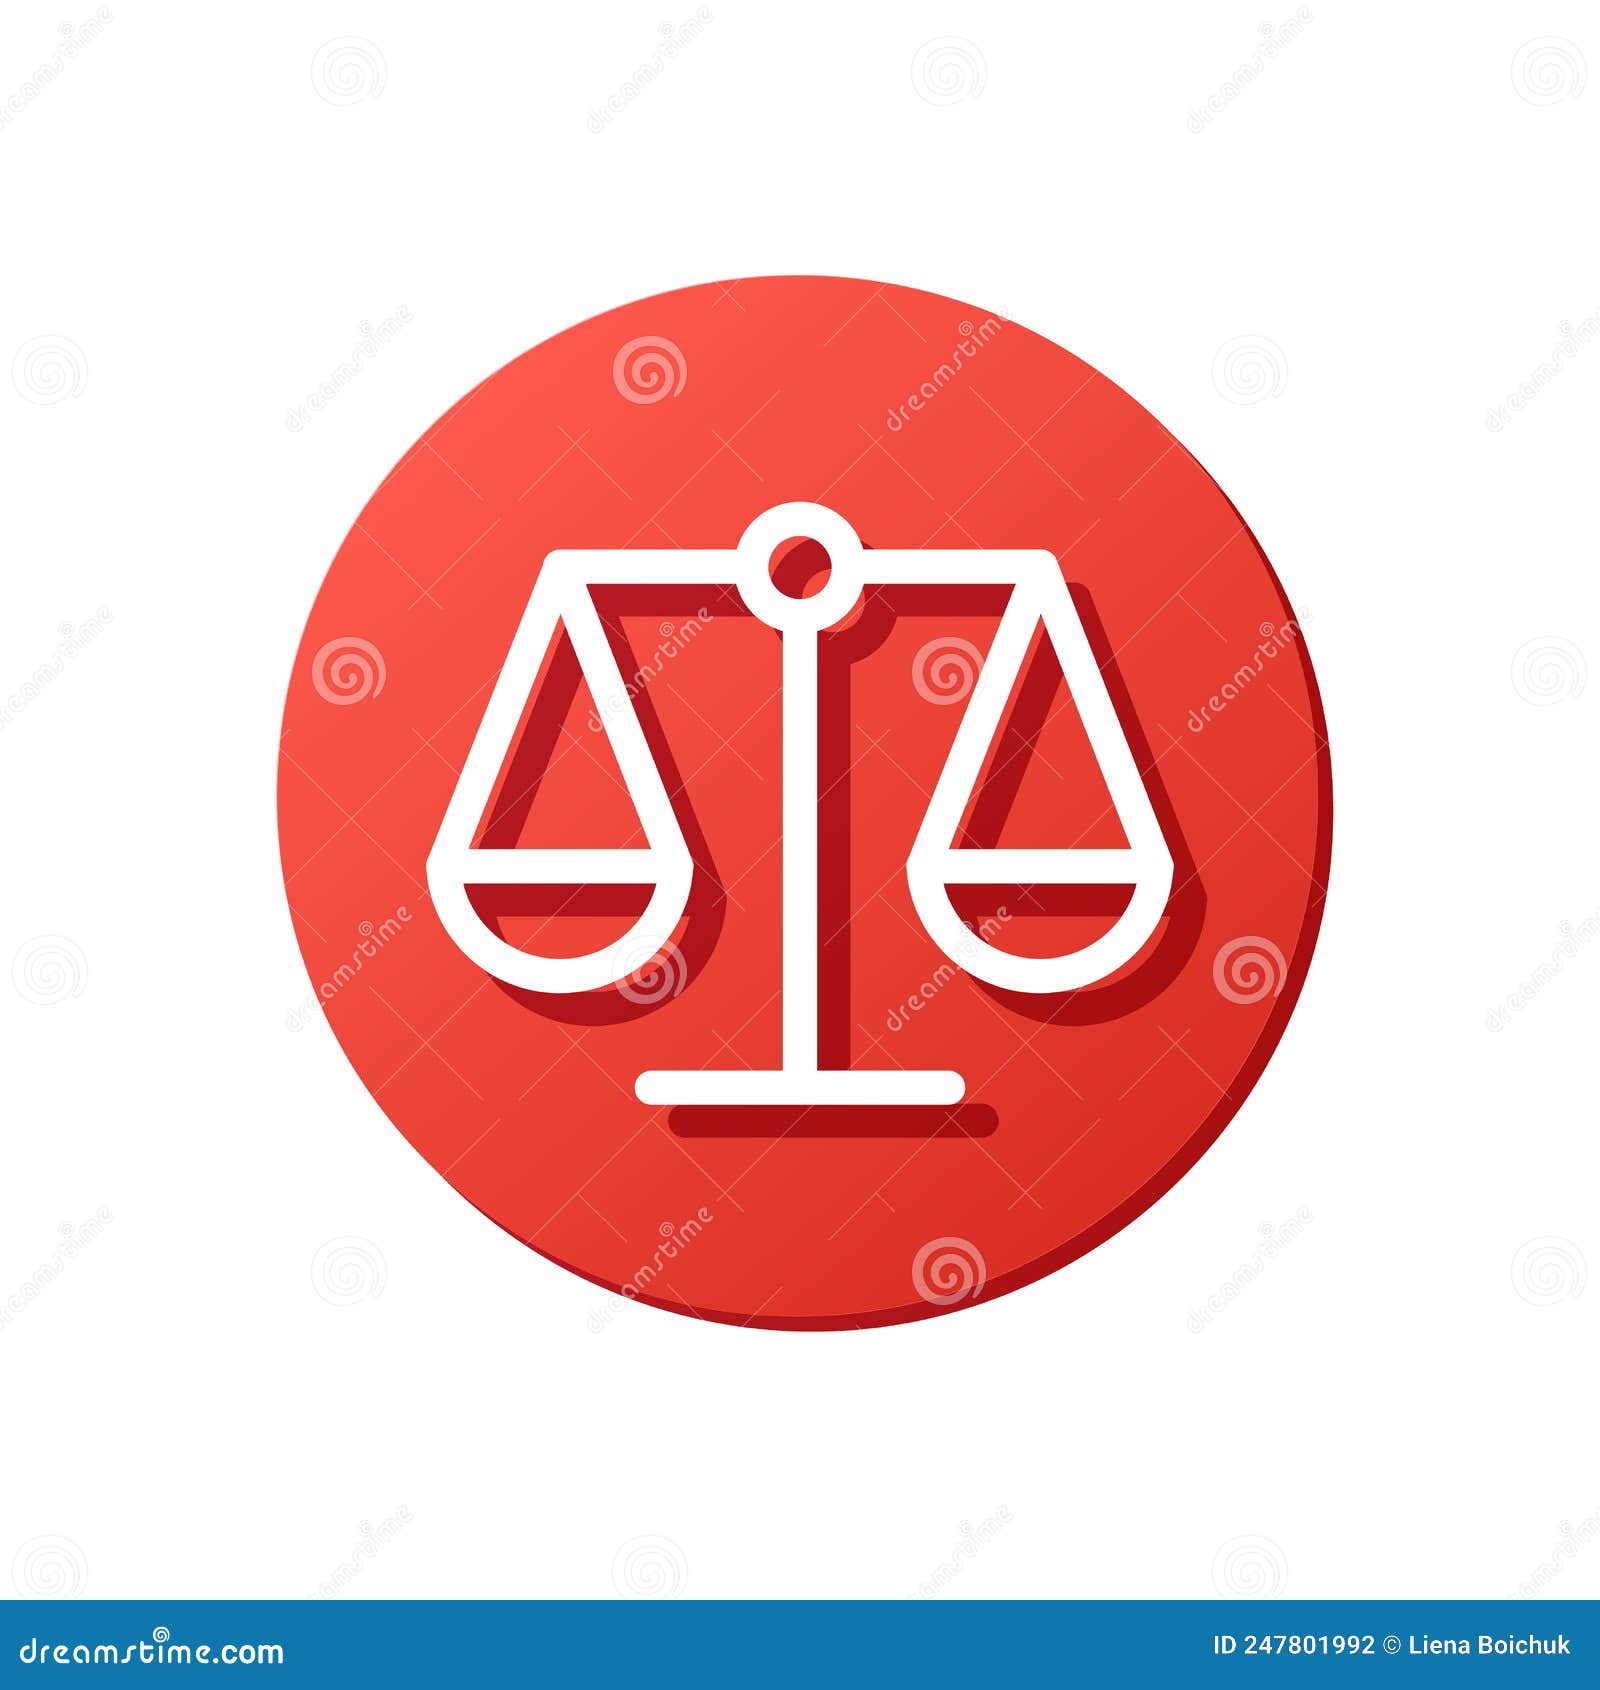 https://thumbs.dreamstime.com/z/scales-white-line-vector-icon-justice-symbol-weight-balance-sign-law-red-rounded-button-attorney-account-avatar-scales-white-247801992.jpg